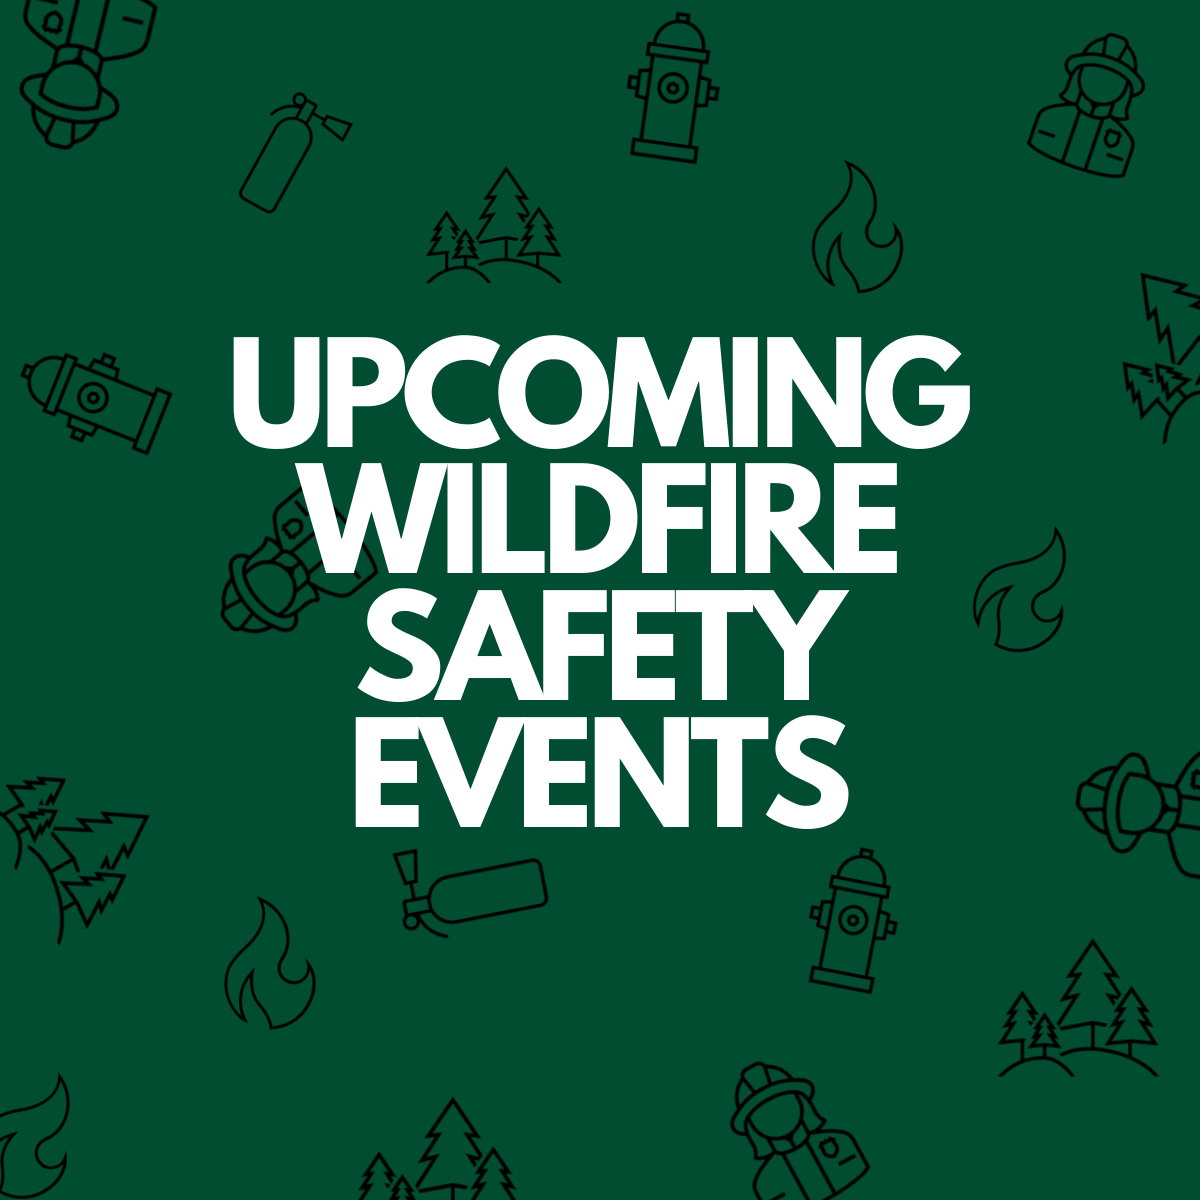 Wildfire Safety Events